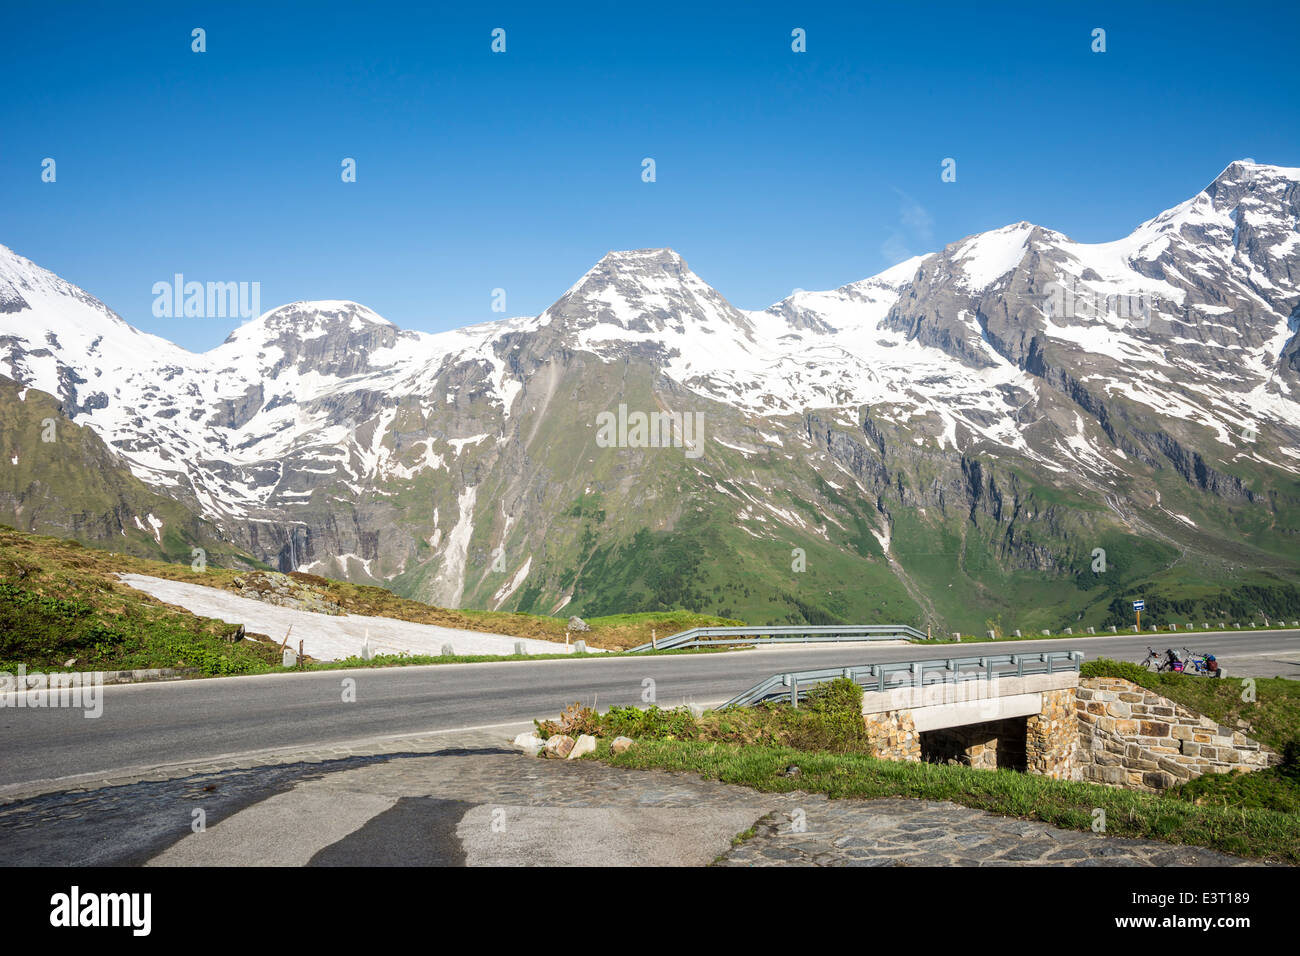 Mountain pass of the Grossglockner High Alpine Road in Austria. Stock Photo